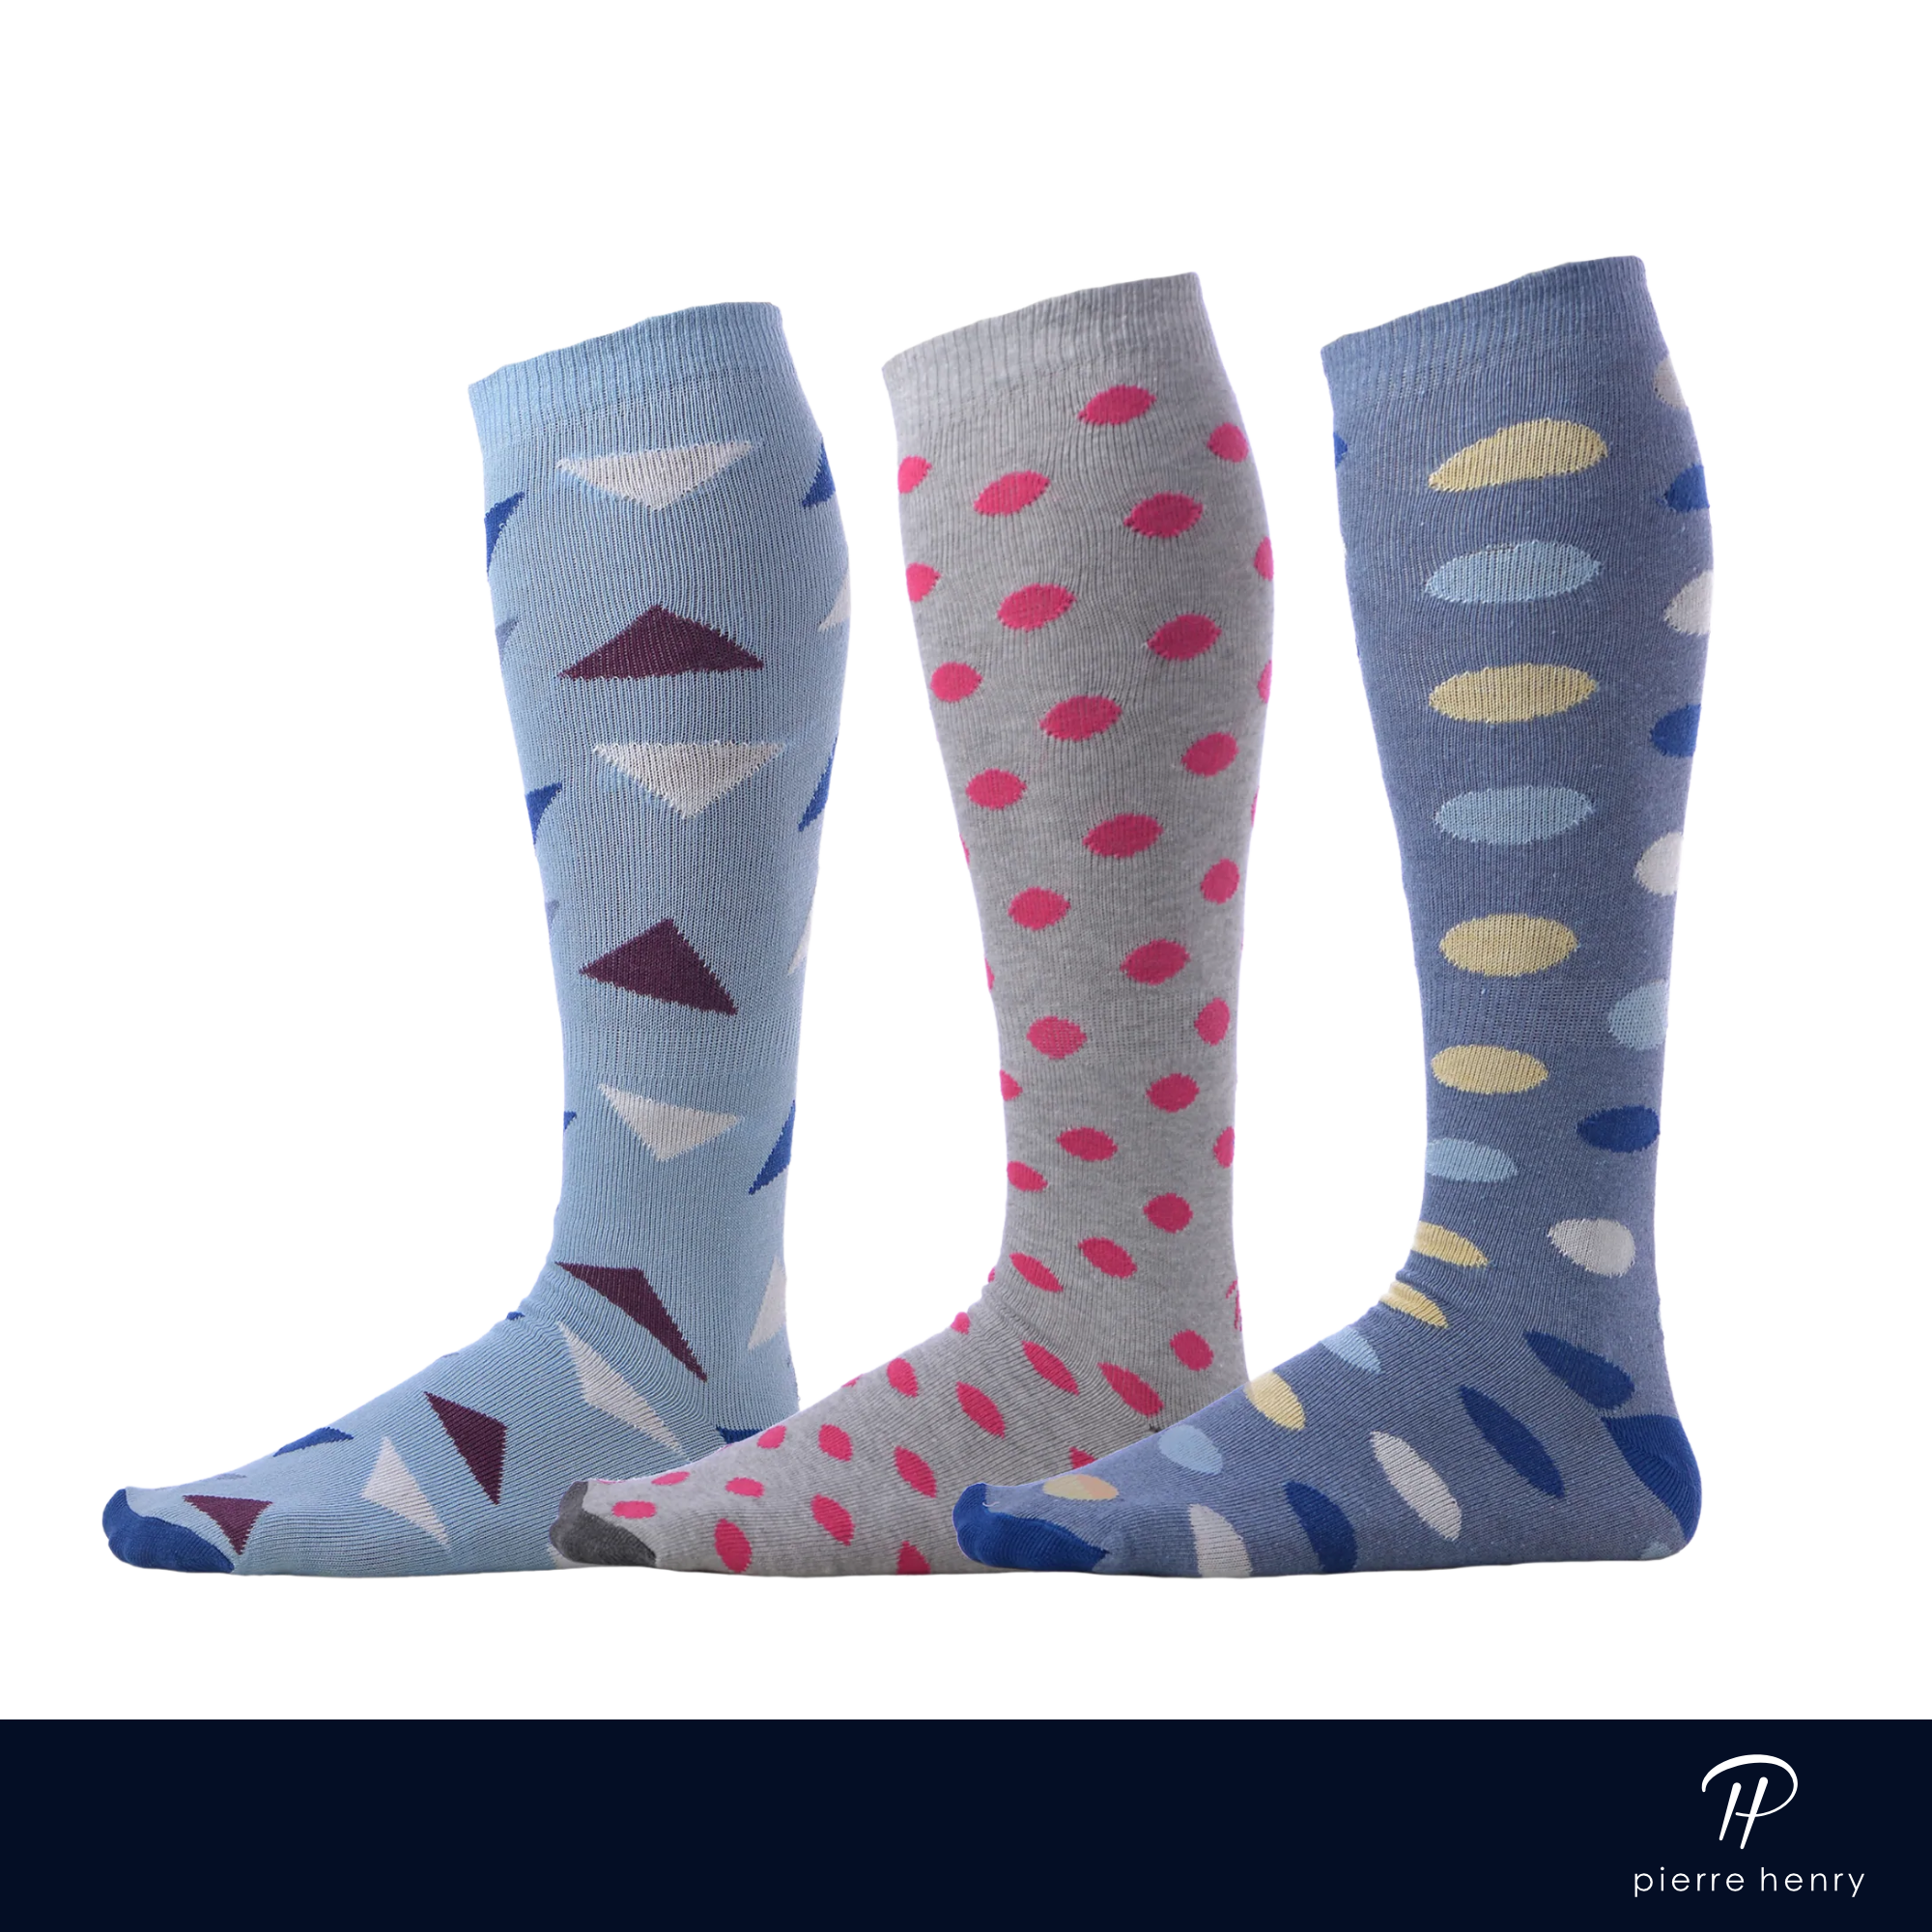 light blue dress socks with colored triangles, light grey dress socks with pink polka dots, royal blue dress socks with colored oval pattern